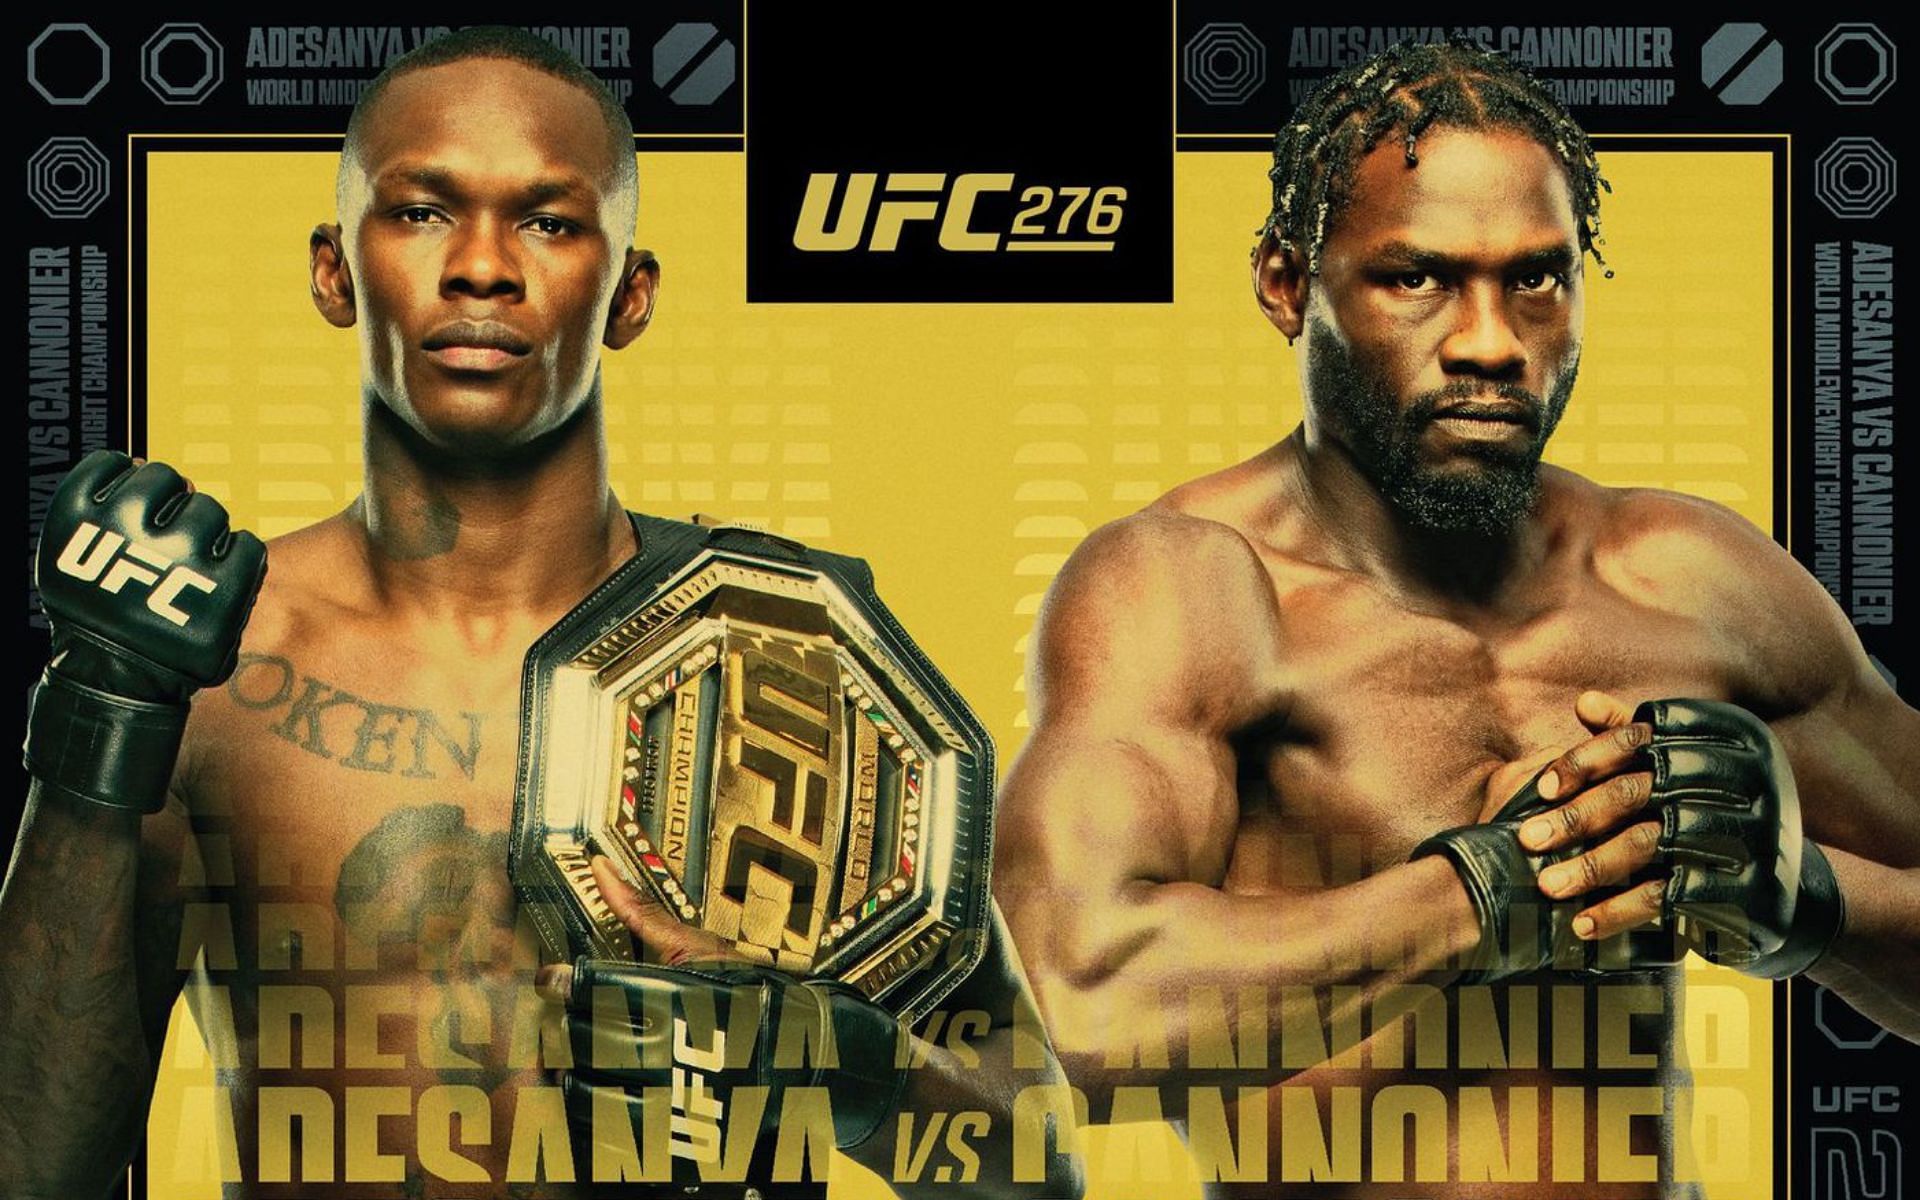 UFC 276 What channel is the UFC fight tonight (July 2, 2022)?